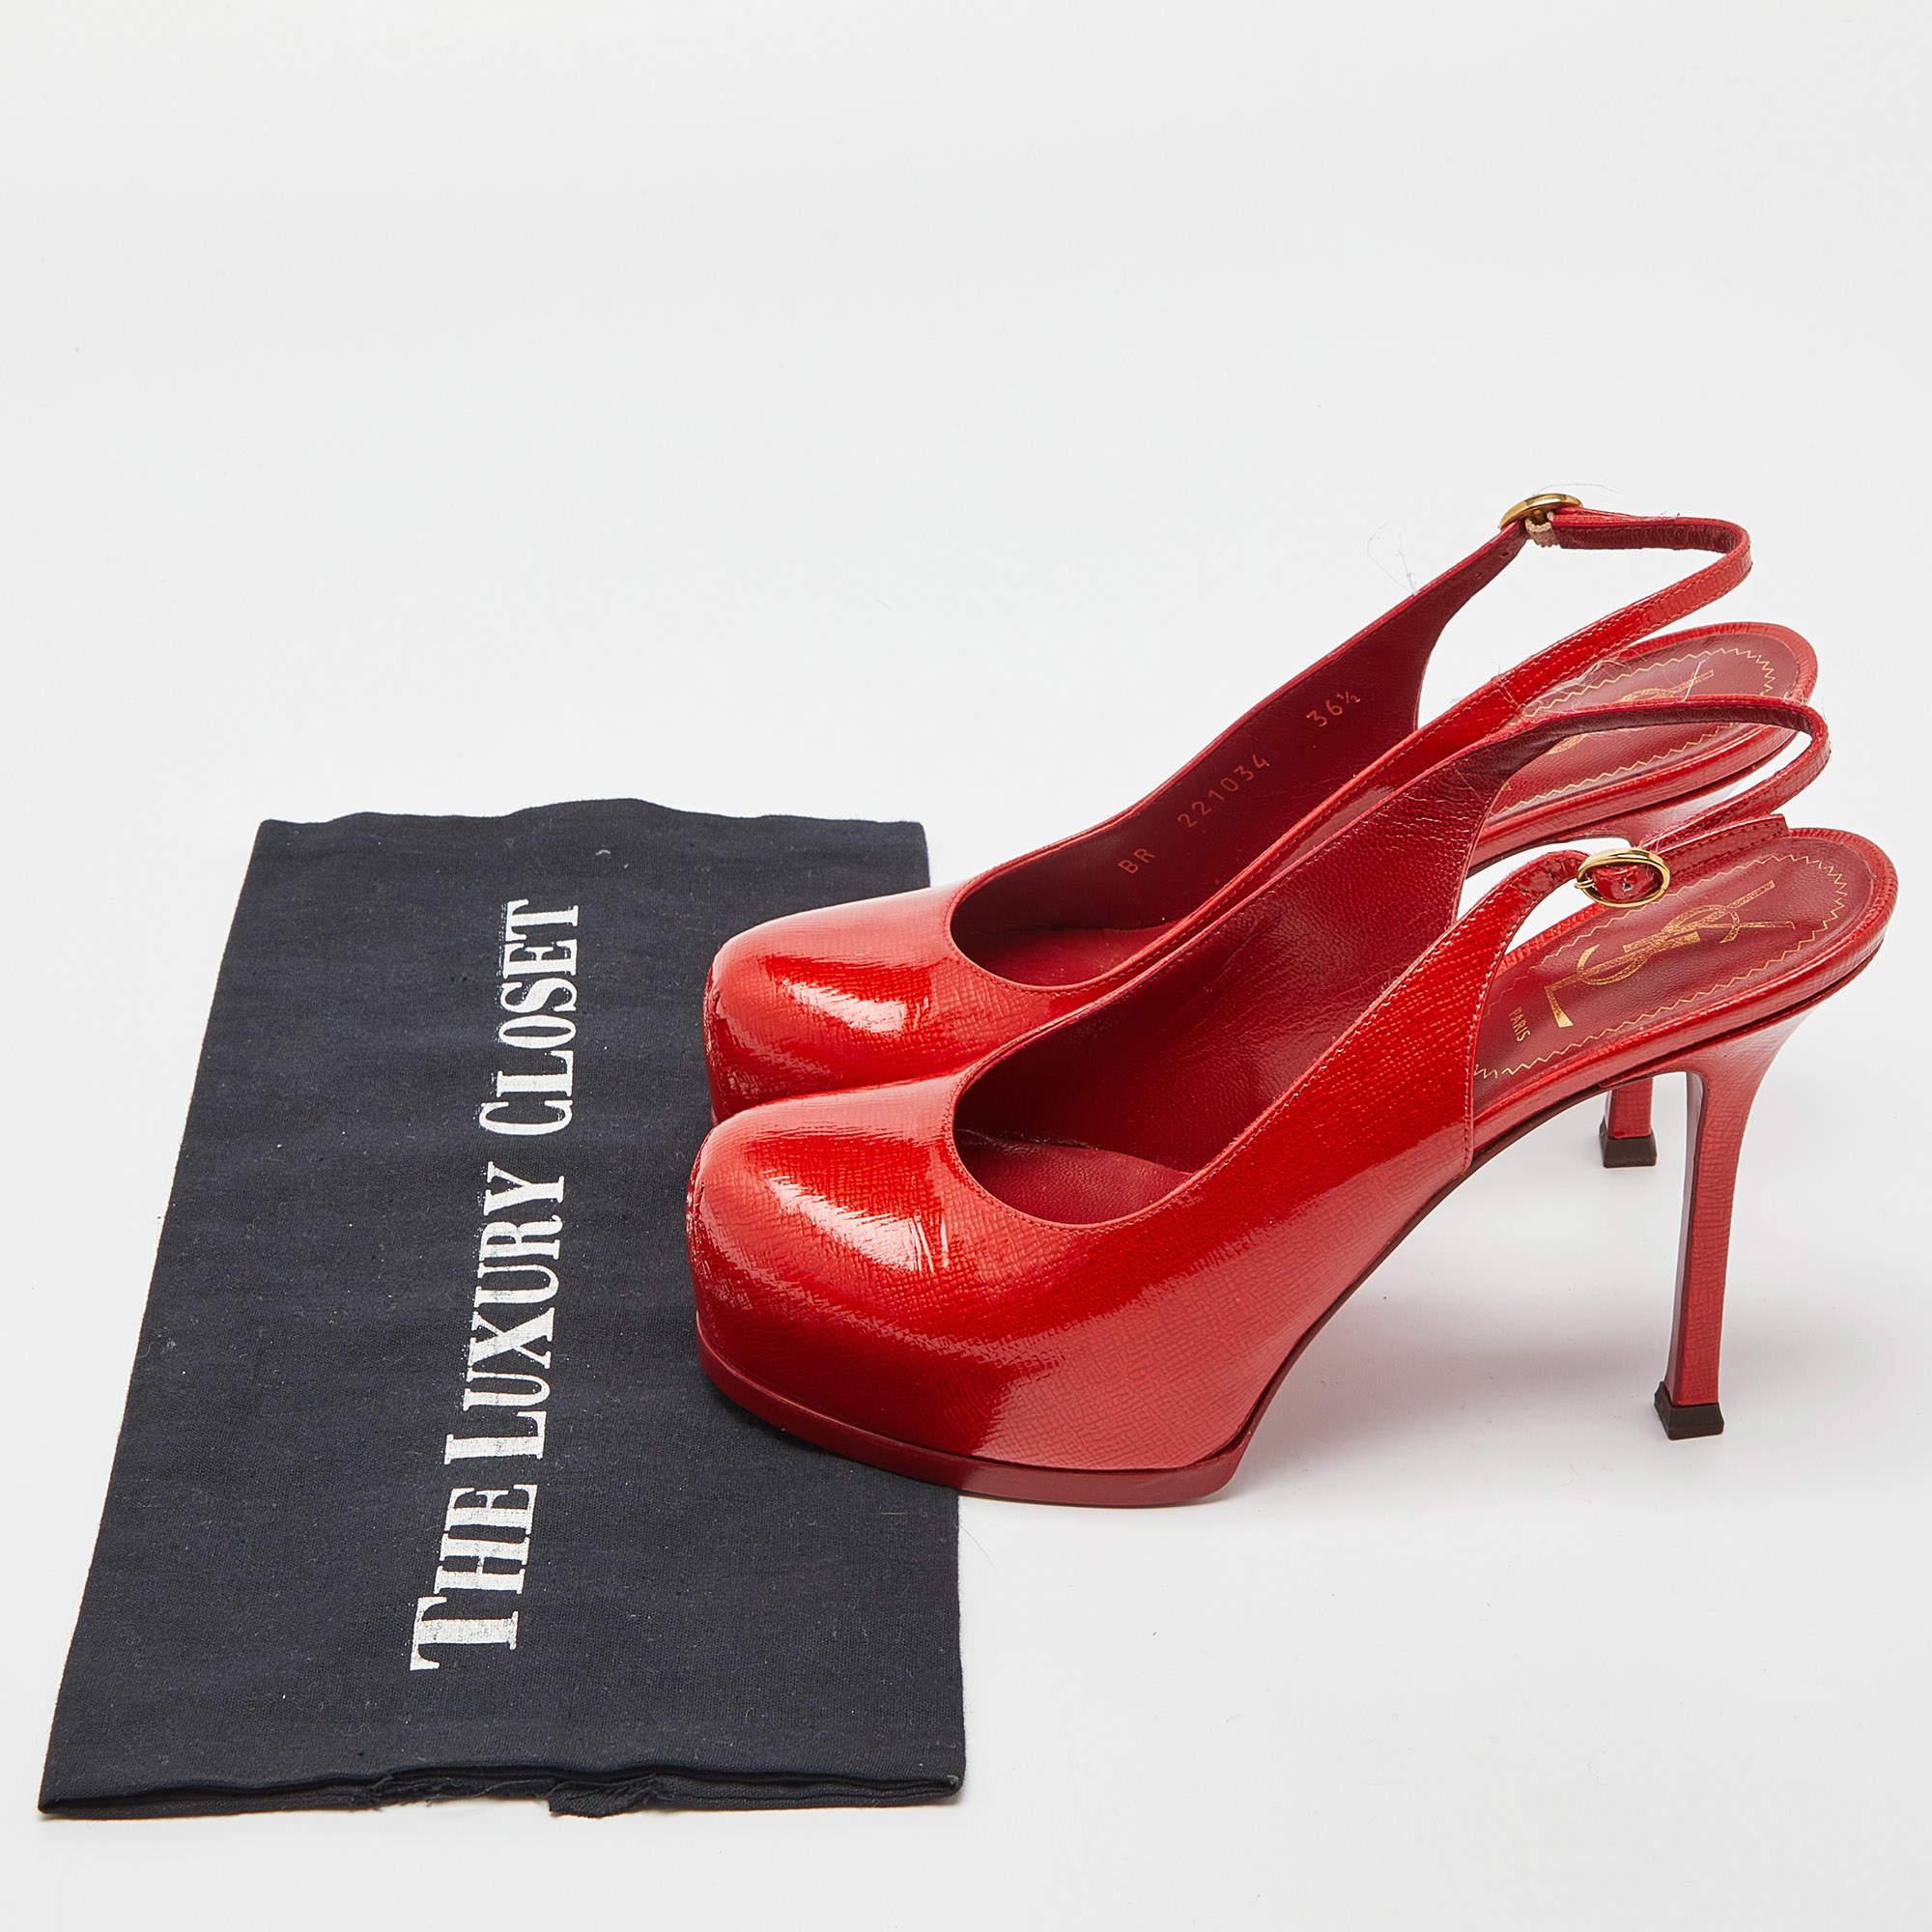 Yves Saint Laurent Red Patent Leather Tribtoo Slingback Pumps Size 36.5 4